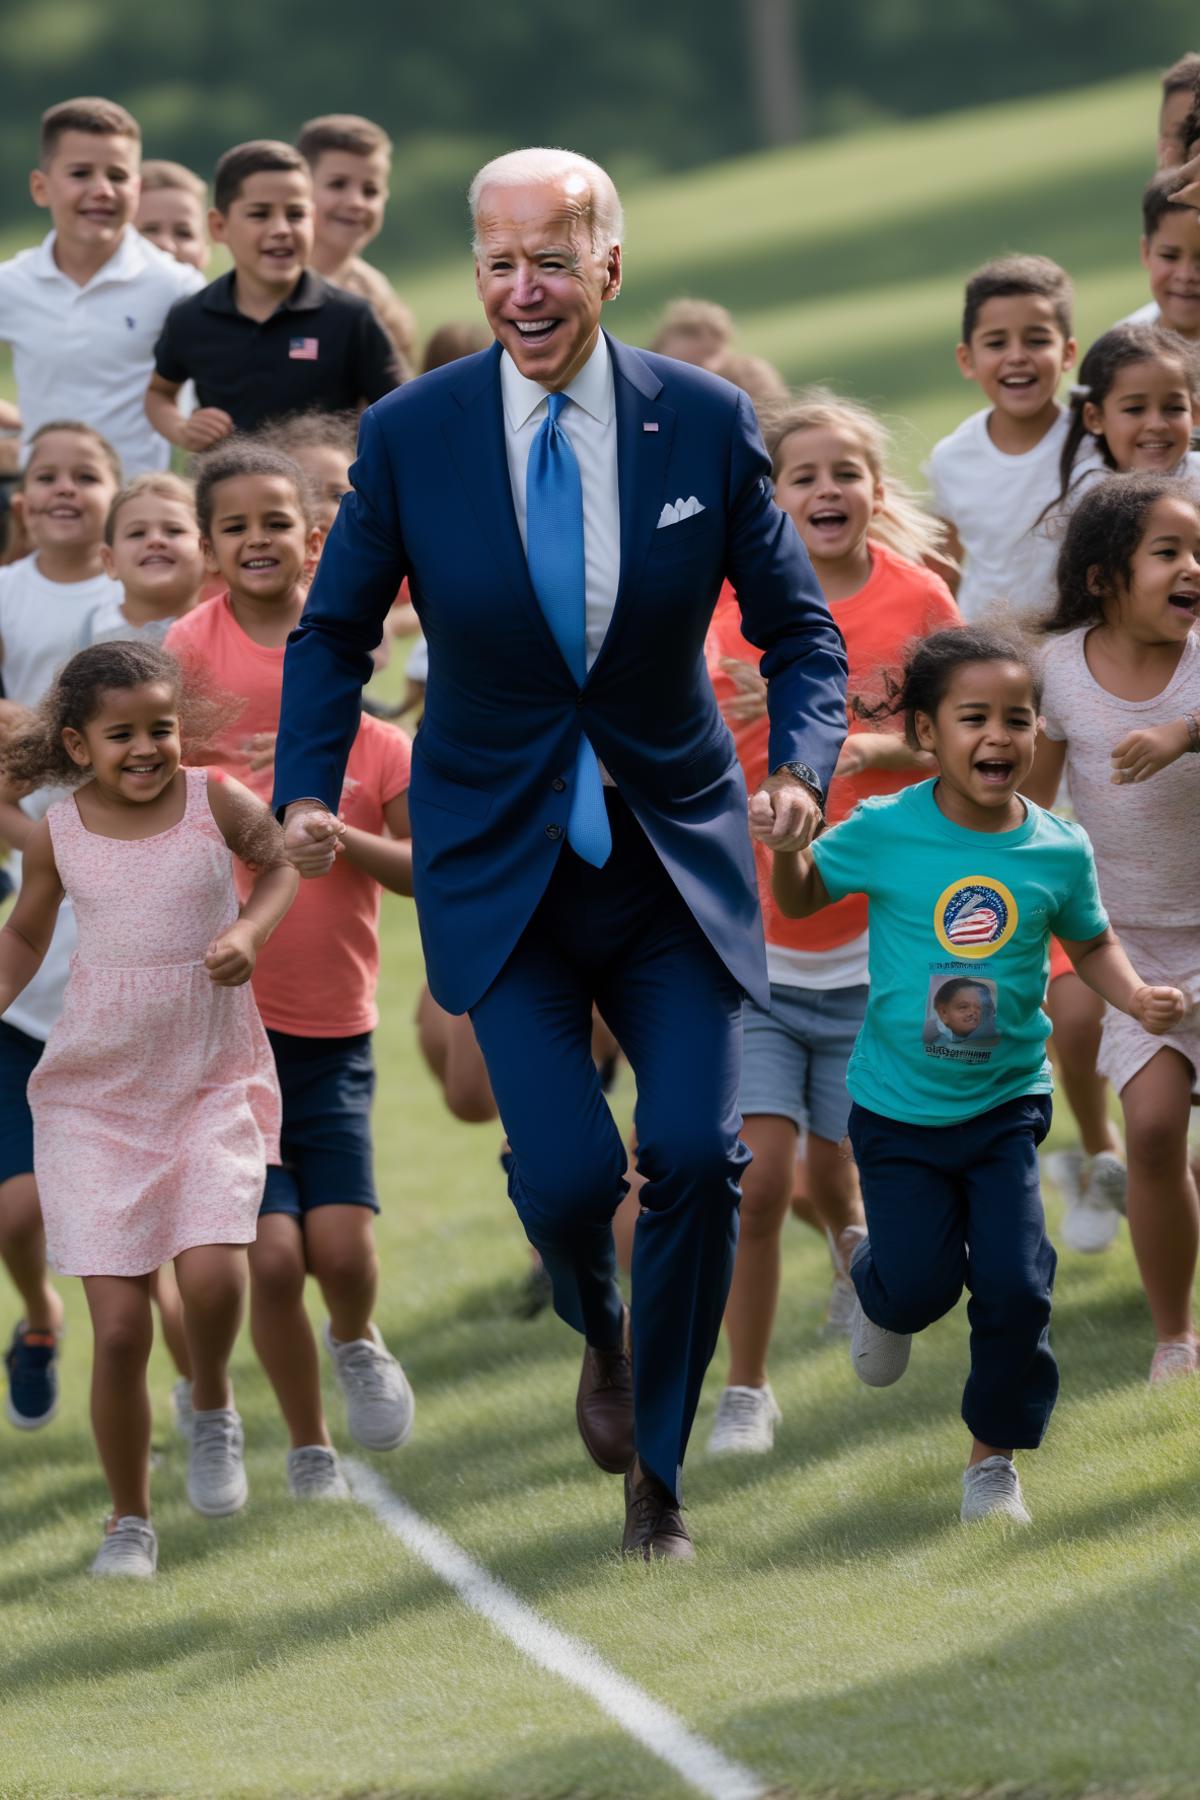 A man in a suit running with a group of children.